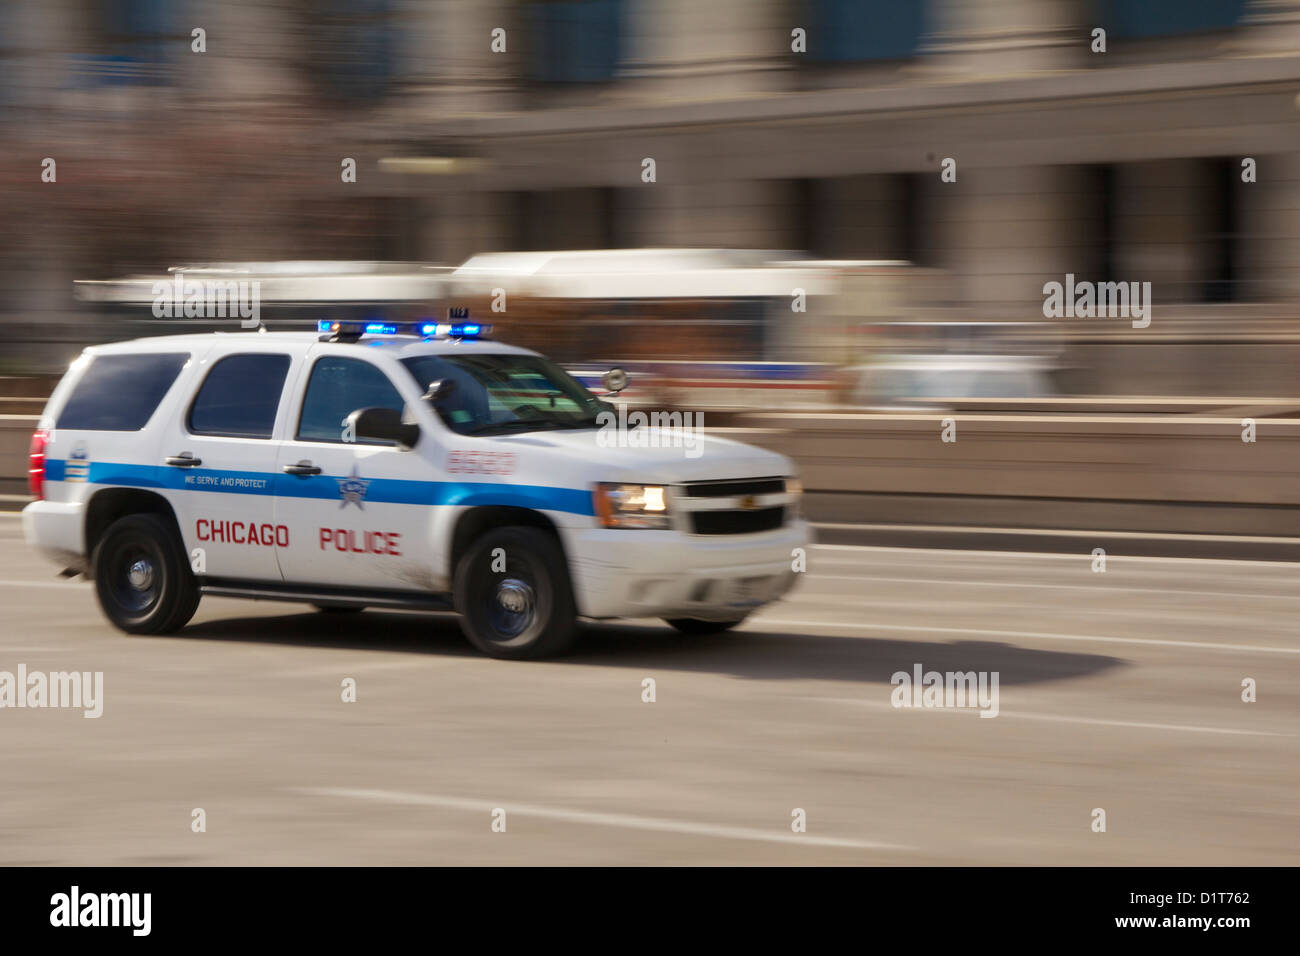 Chicago Police SUV on emergency call. Motion blur. Stock Photo